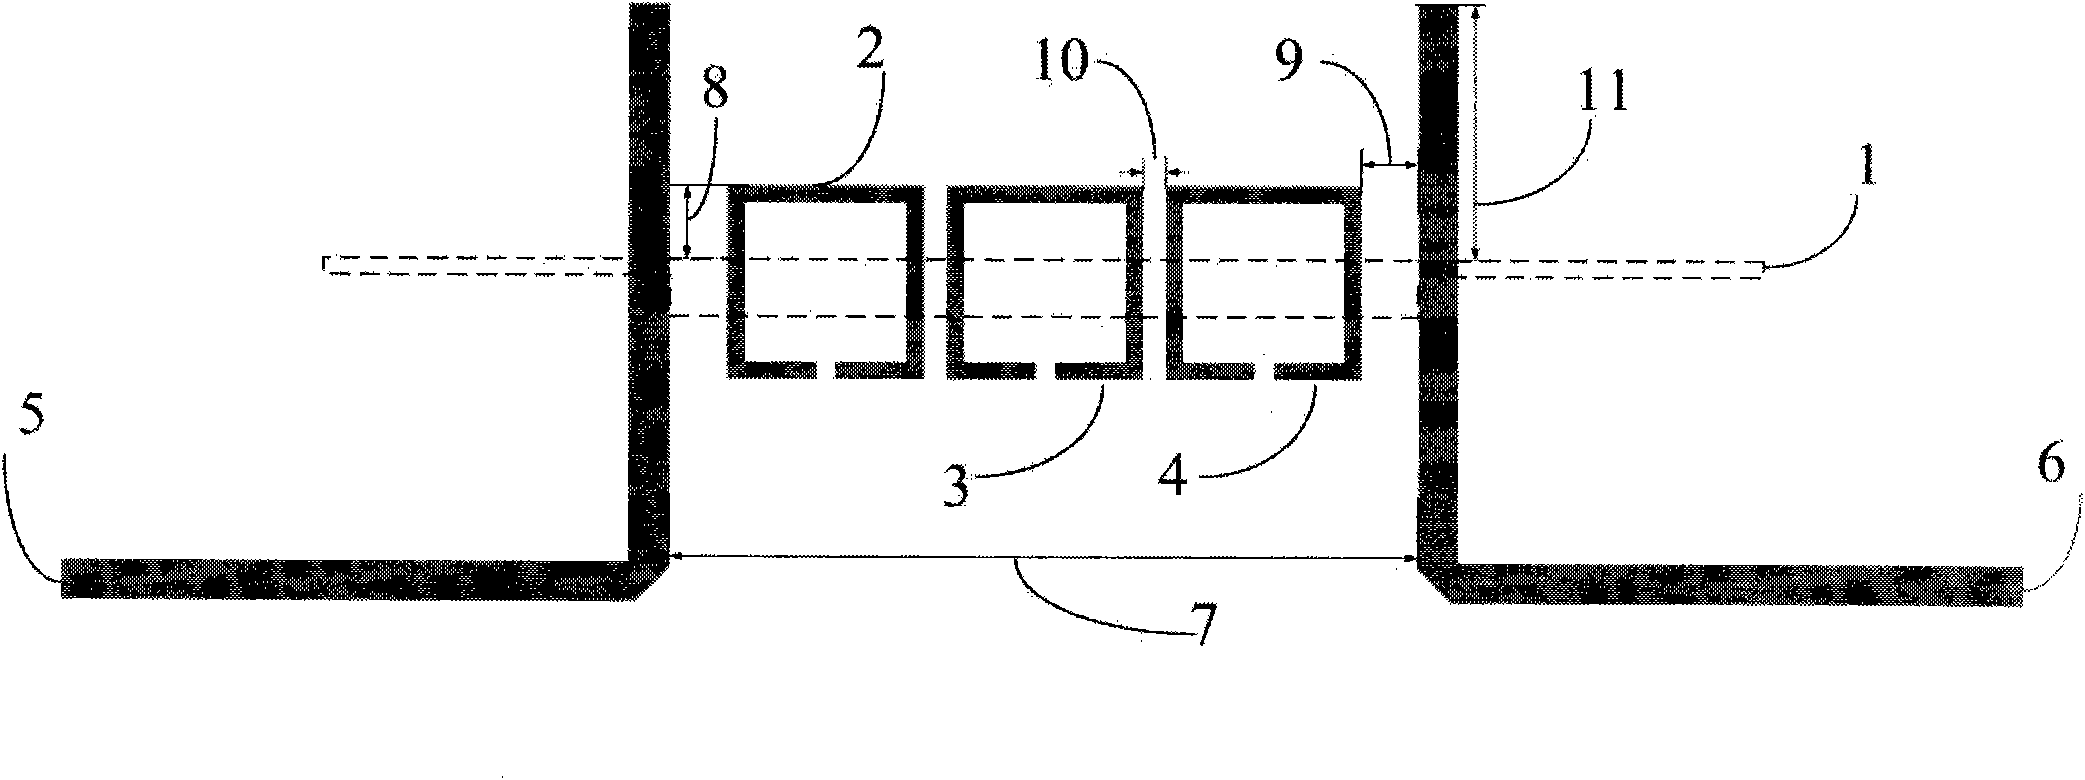 Ultra-wideband band-pass filter with band stop characteristic